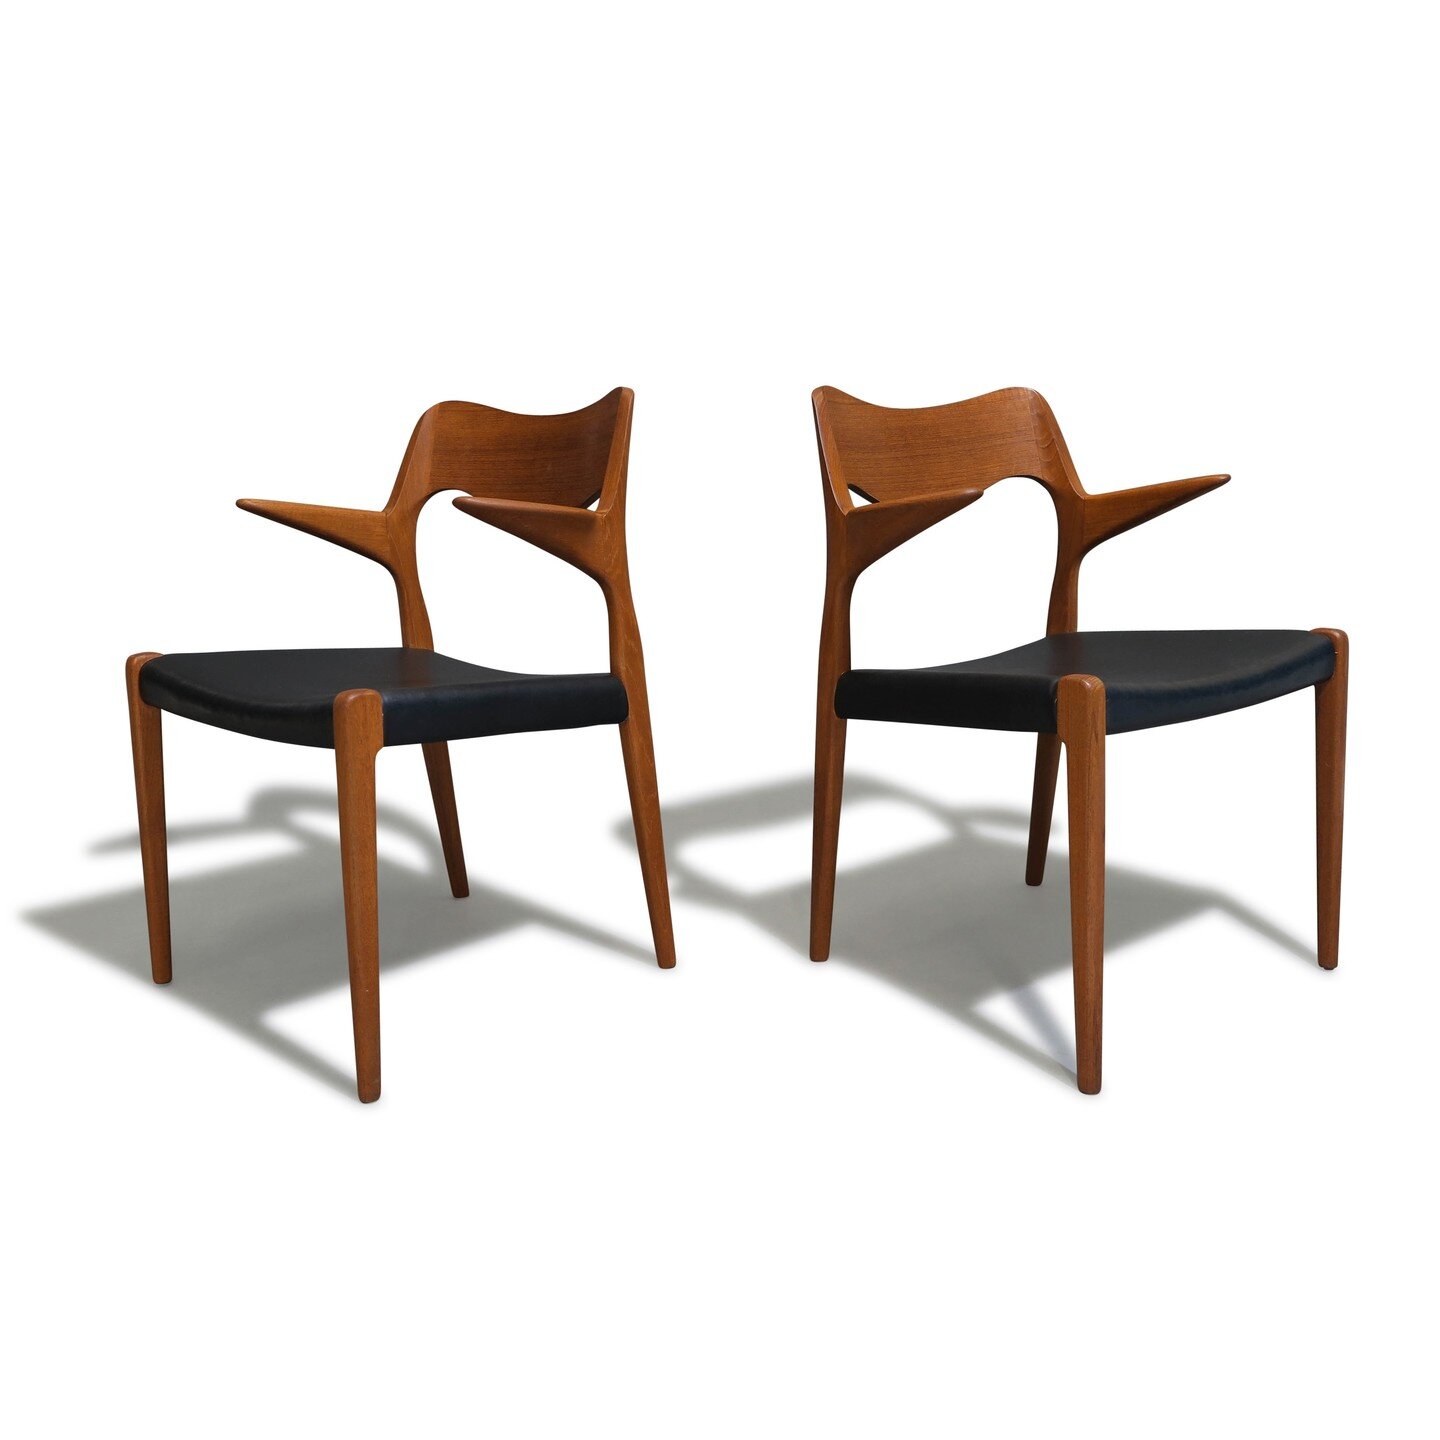 #midcentury #danish #teak #armchairs designed by #nielsmoller for J.L. Moller, Model 55, Denmark, circa 1960. The chair frames are crafted from solid teak, showcasing sculptural floating armrests and upholstered in the original black leather seats.